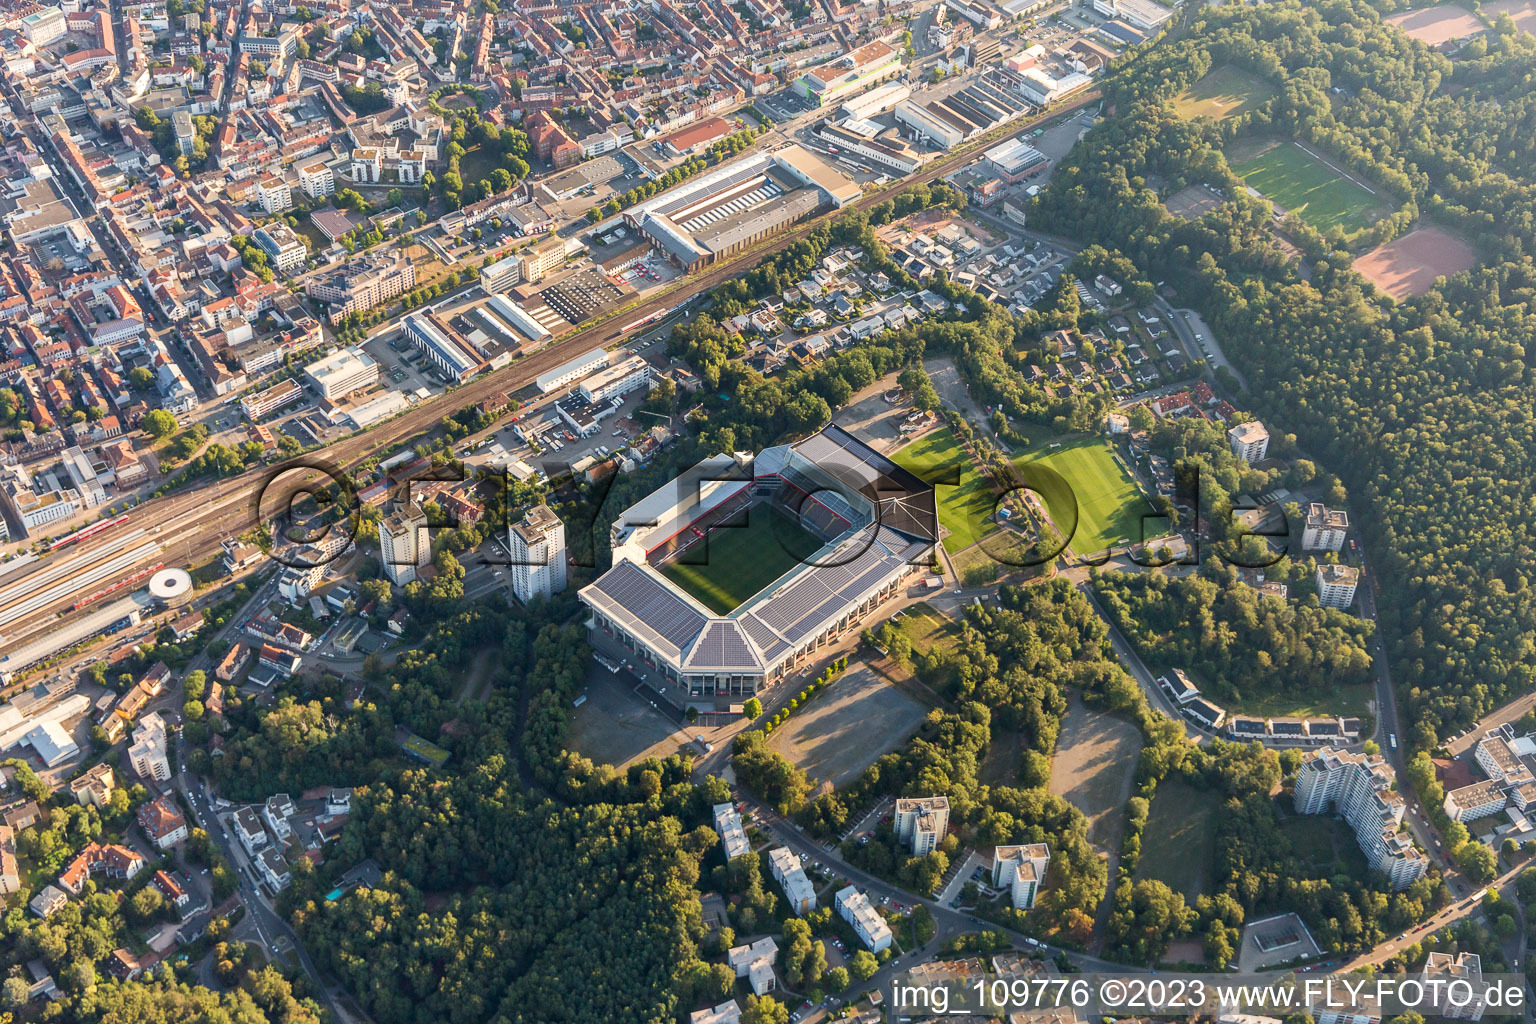 Aerial photograpy of Fritz-Walter Stadium of the FCK on the Betzenberg in Kaiserslautern in the state Rhineland-Palatinate, Germany